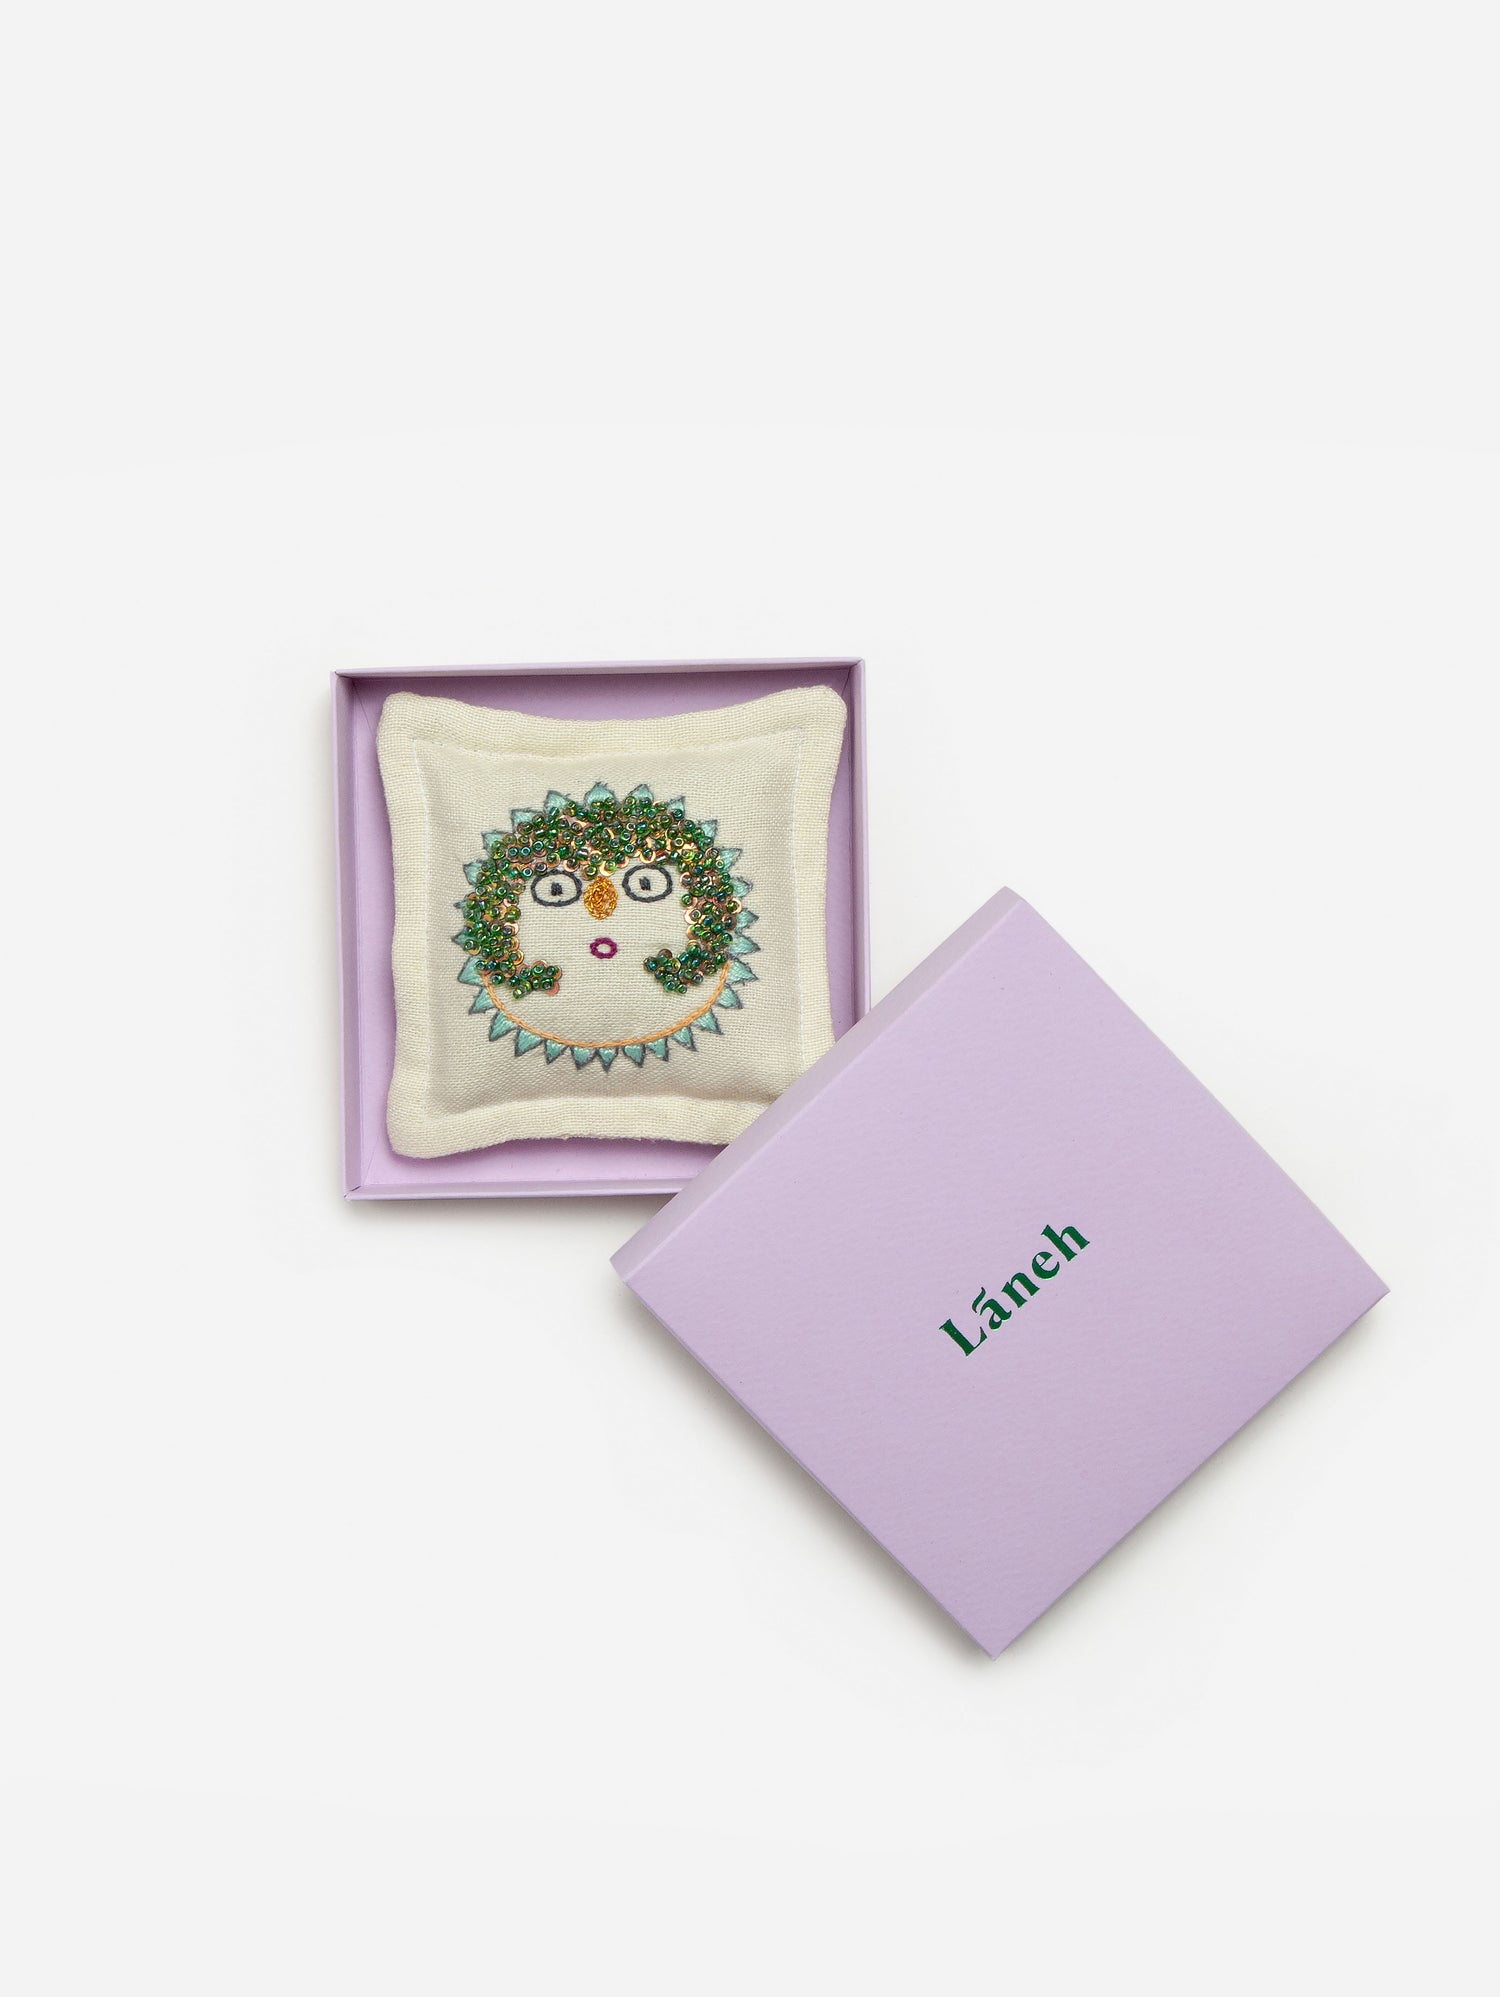 Lemon/ Parrot green embroidered Sun Lady Lavandin sachet with green beads placed inside a lavender Laneh box